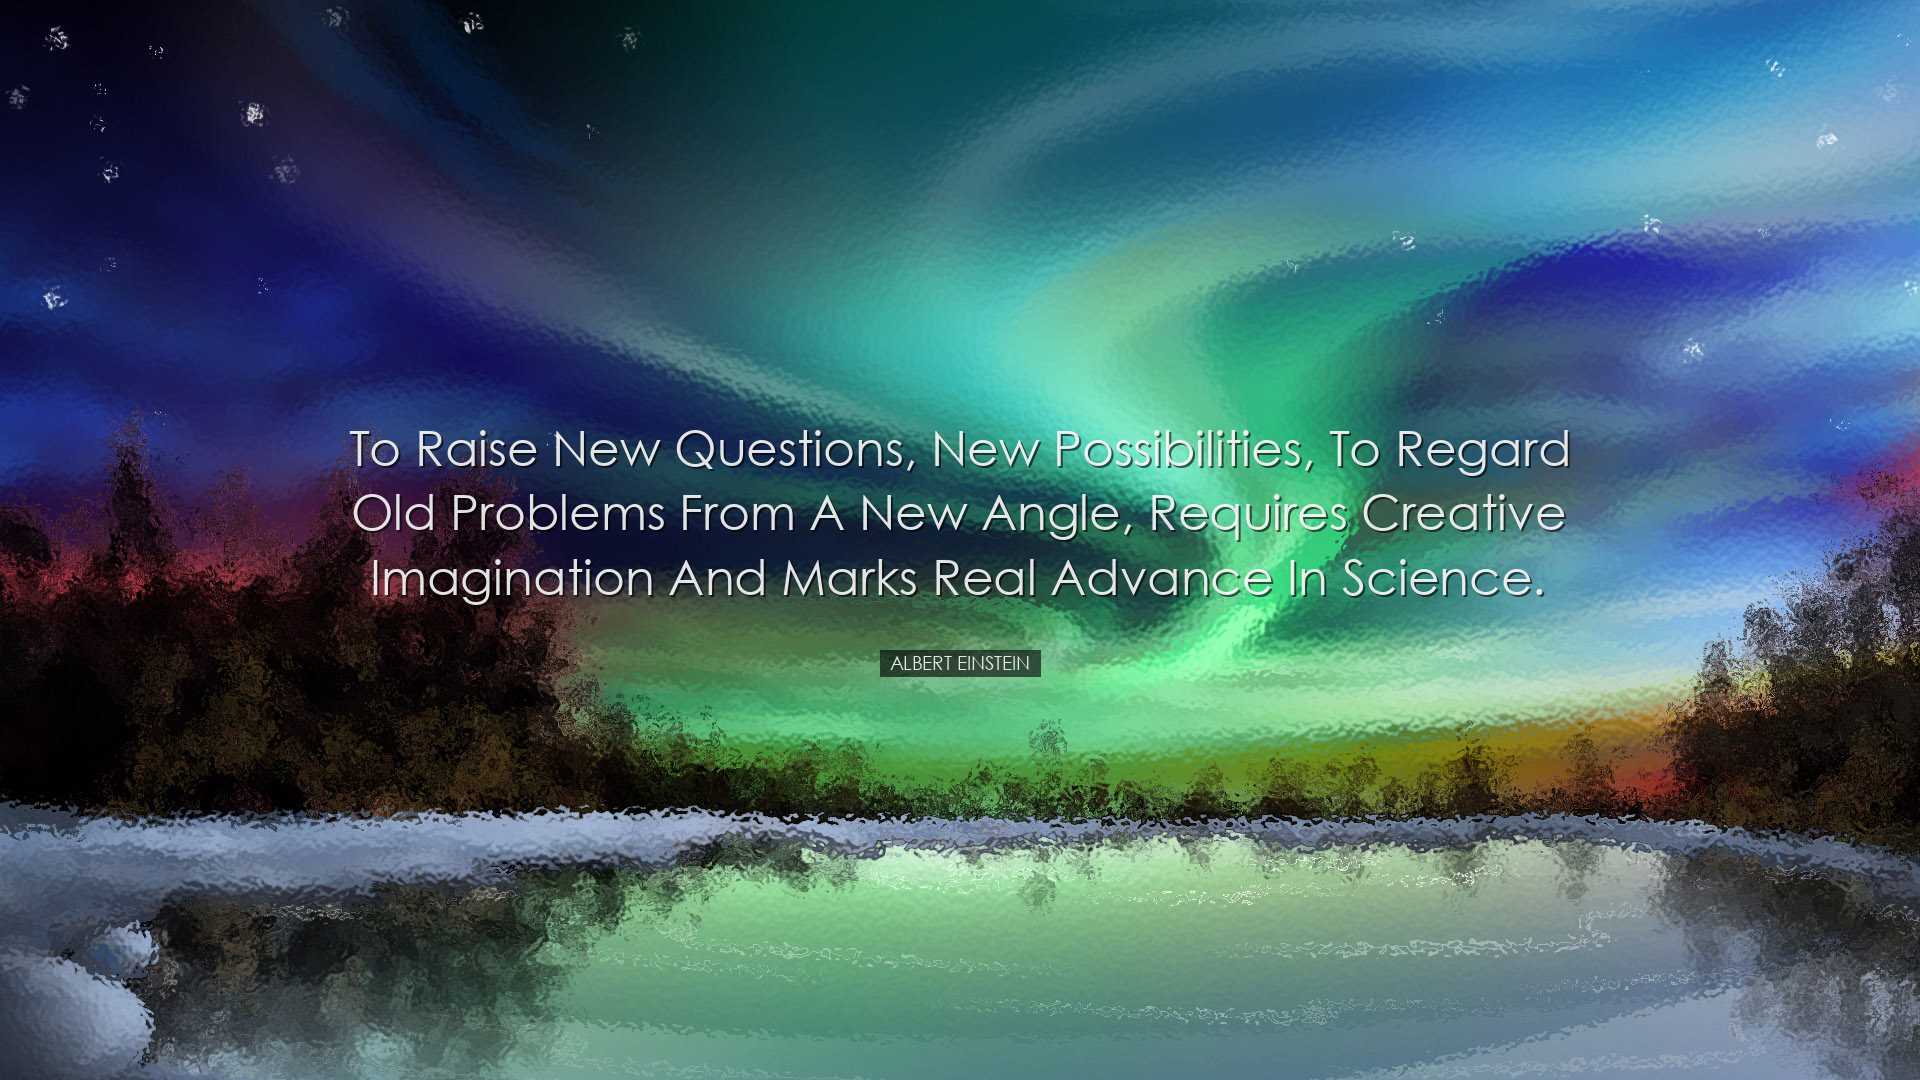 To raise new questions, new possibilities, to regard old problems